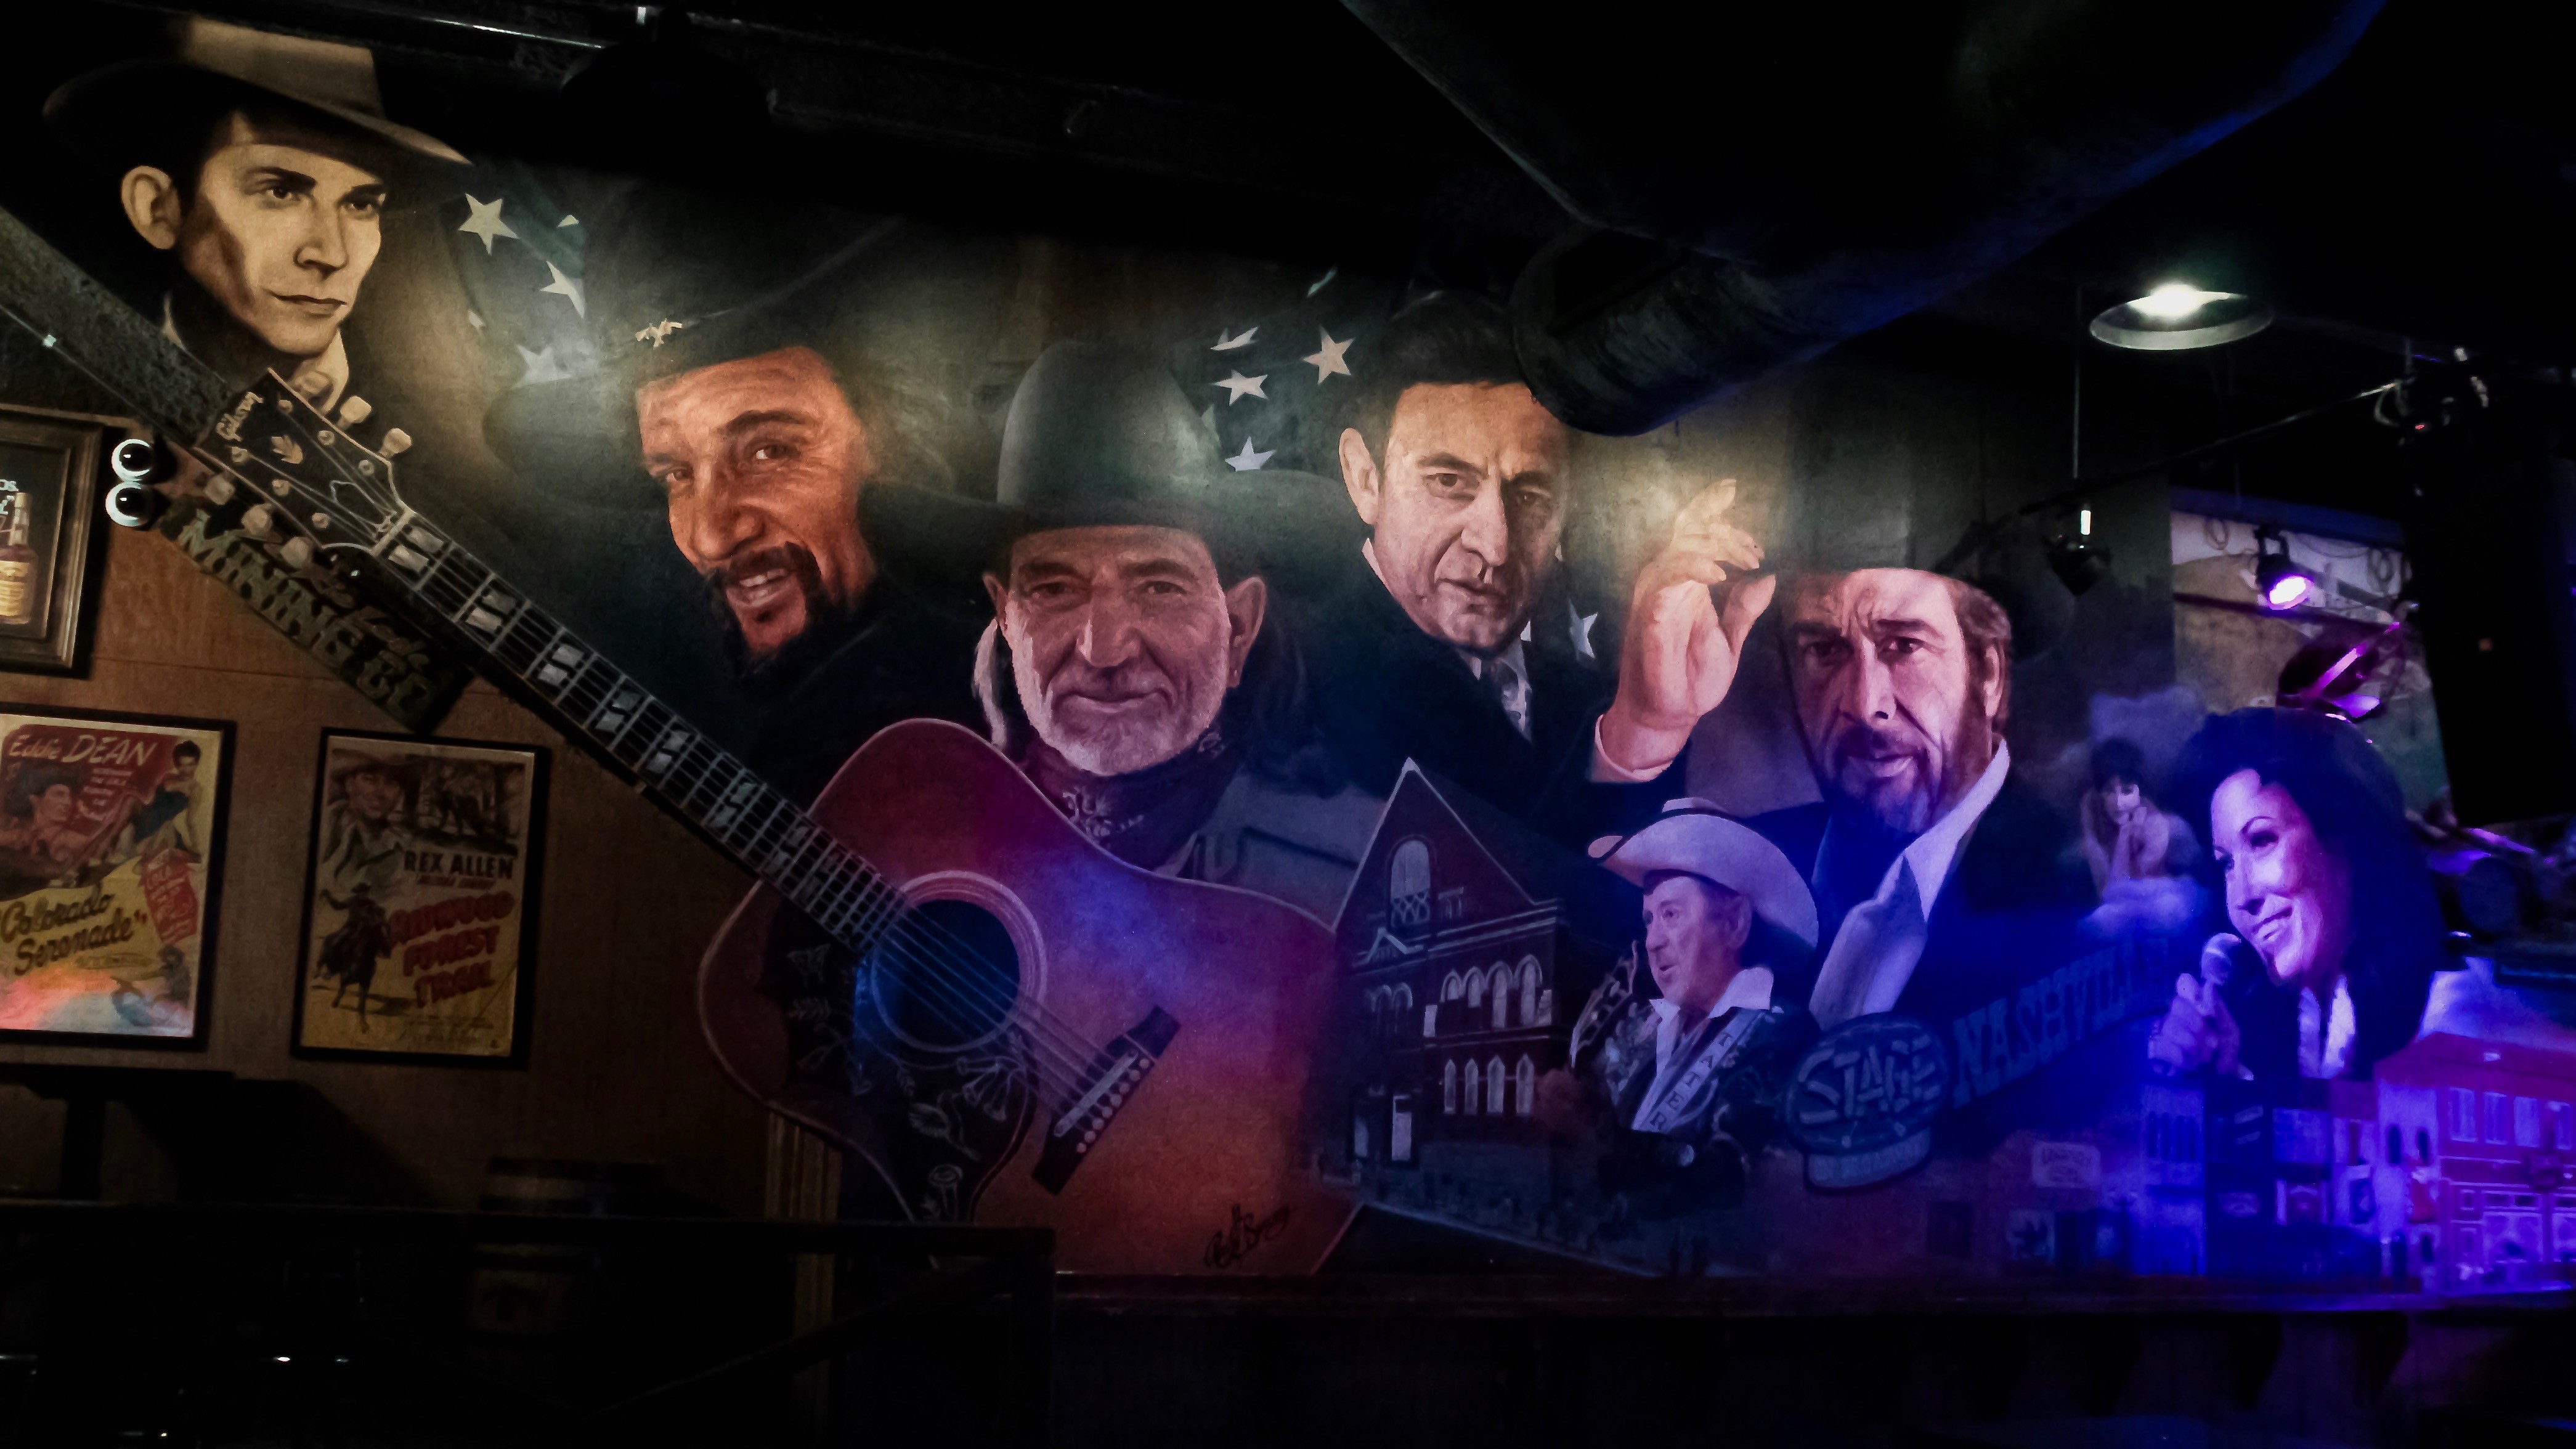 The Stage Connects Visitors with Country Music History